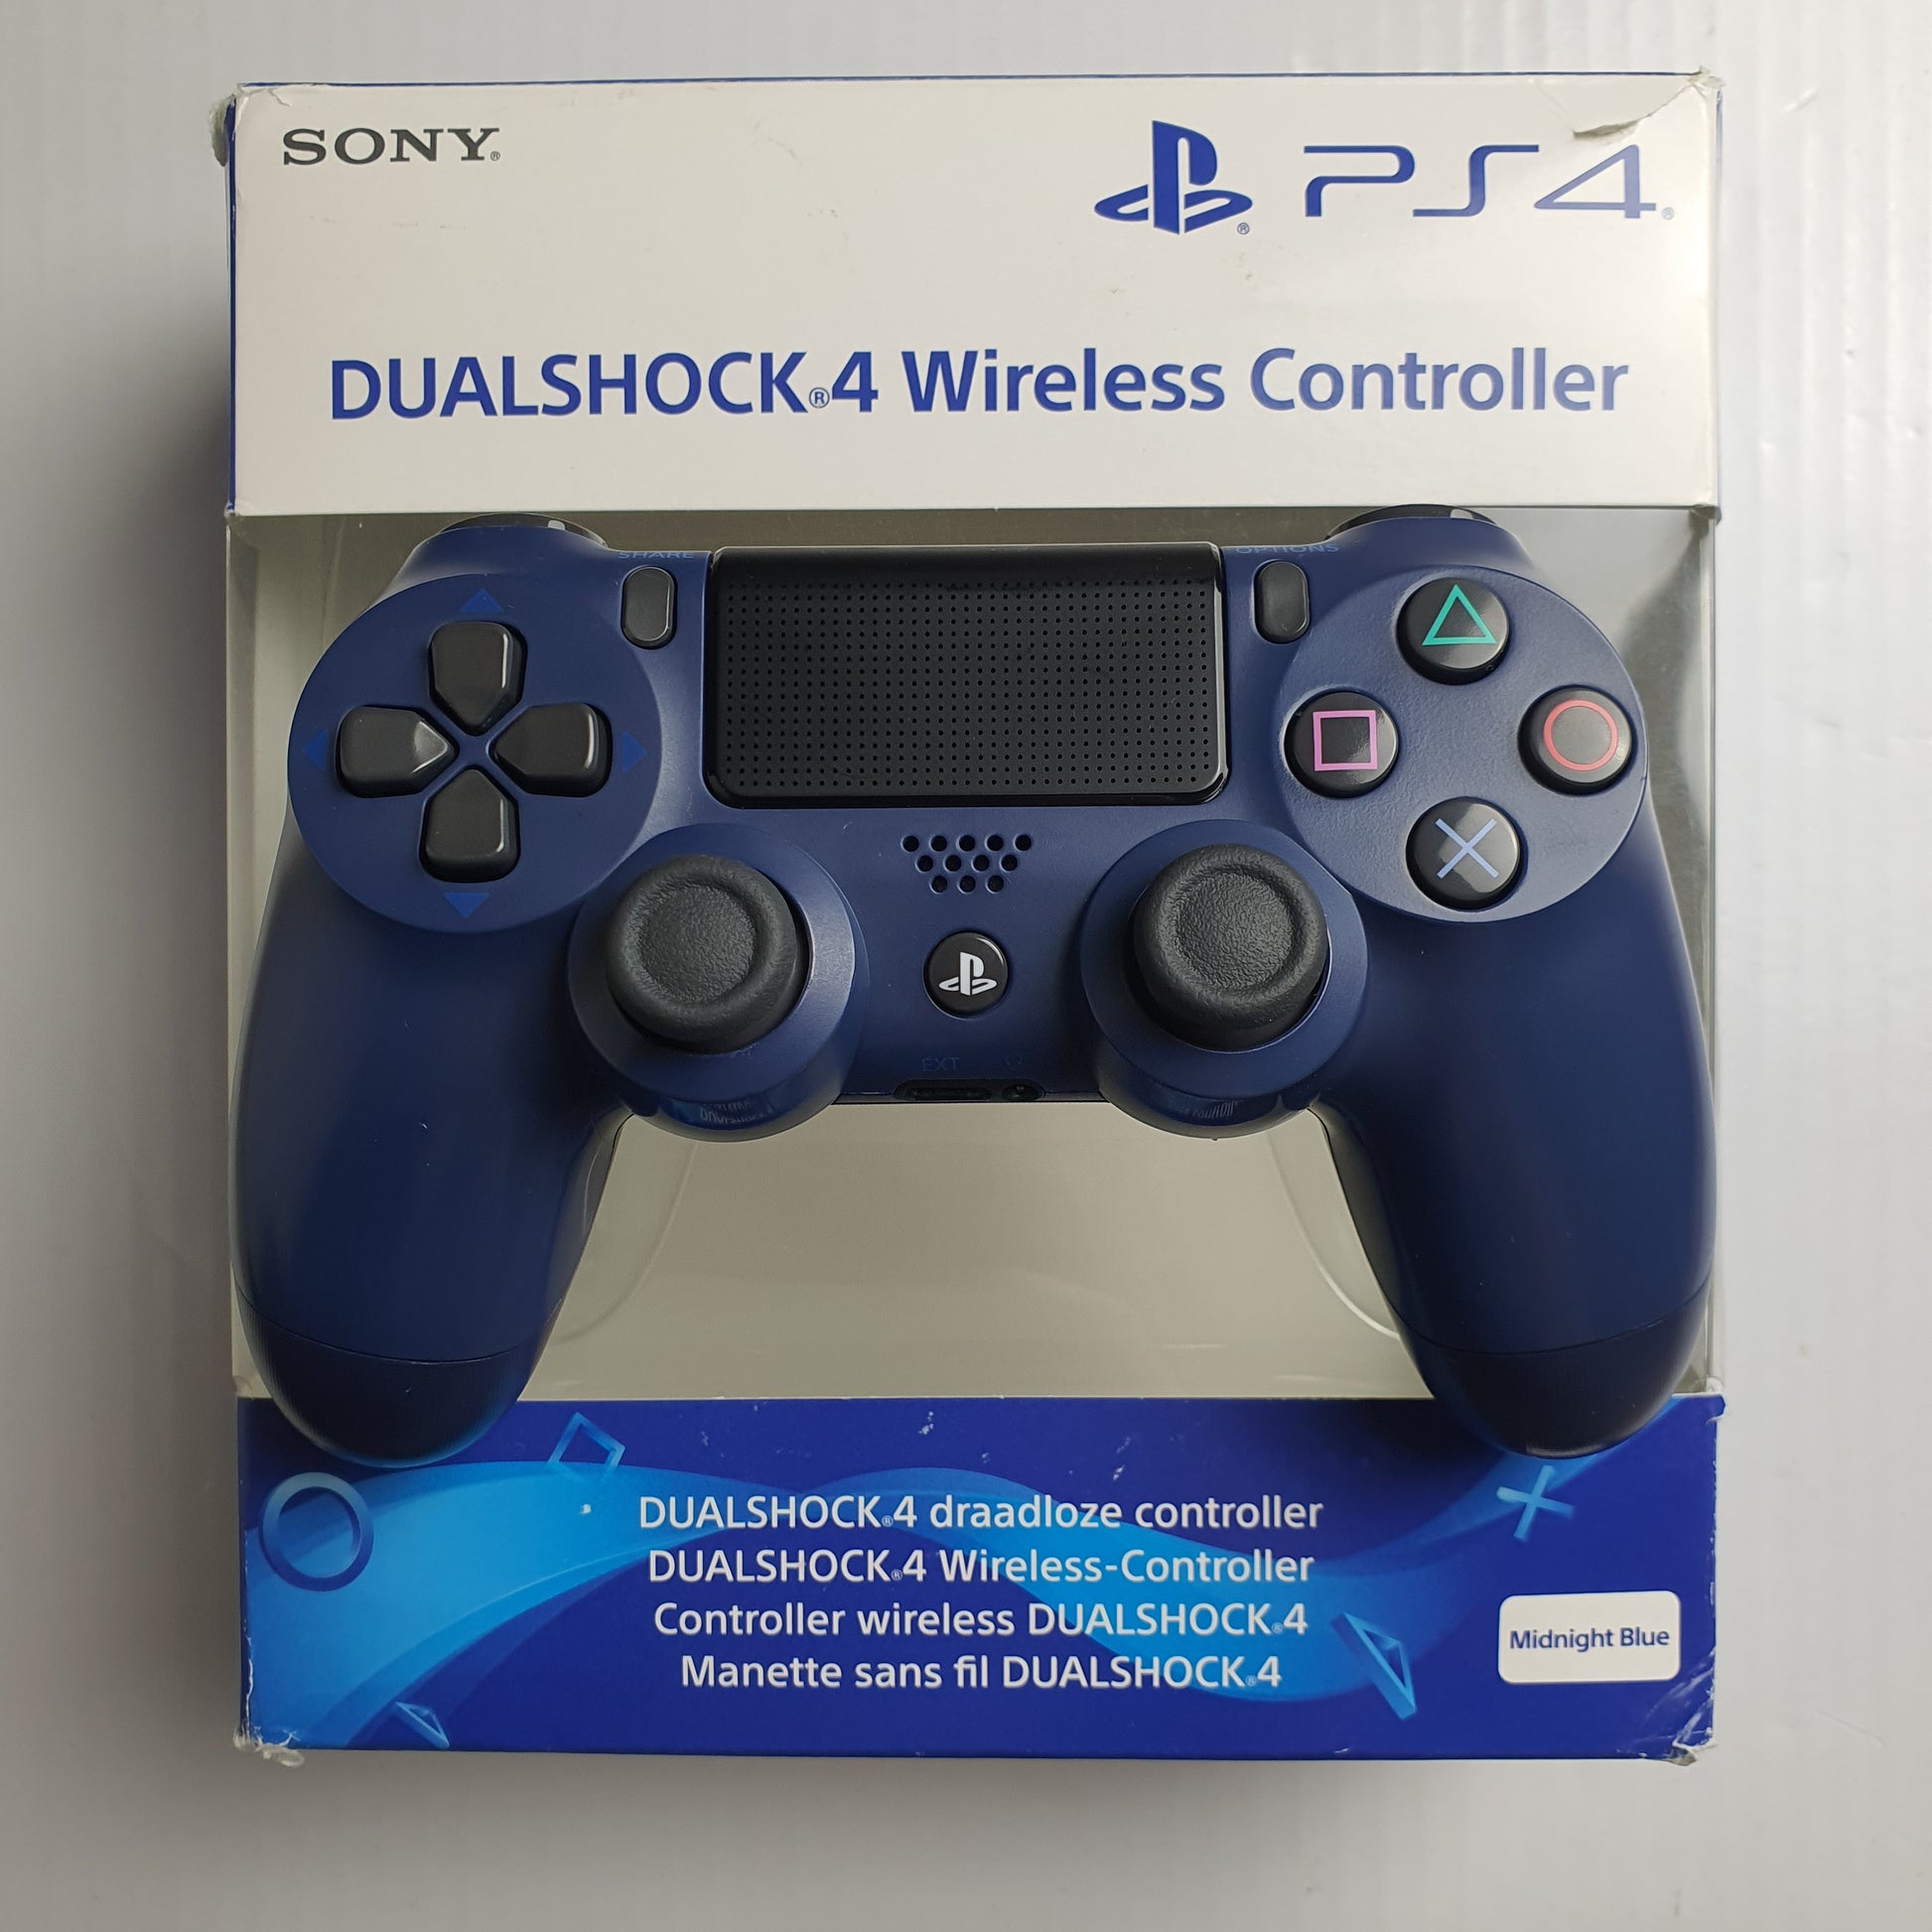 Offical Sony PlayStation Boxe PS4 \'Midnight DualShock Wireless Tech Blue\' Dogghead 4 –